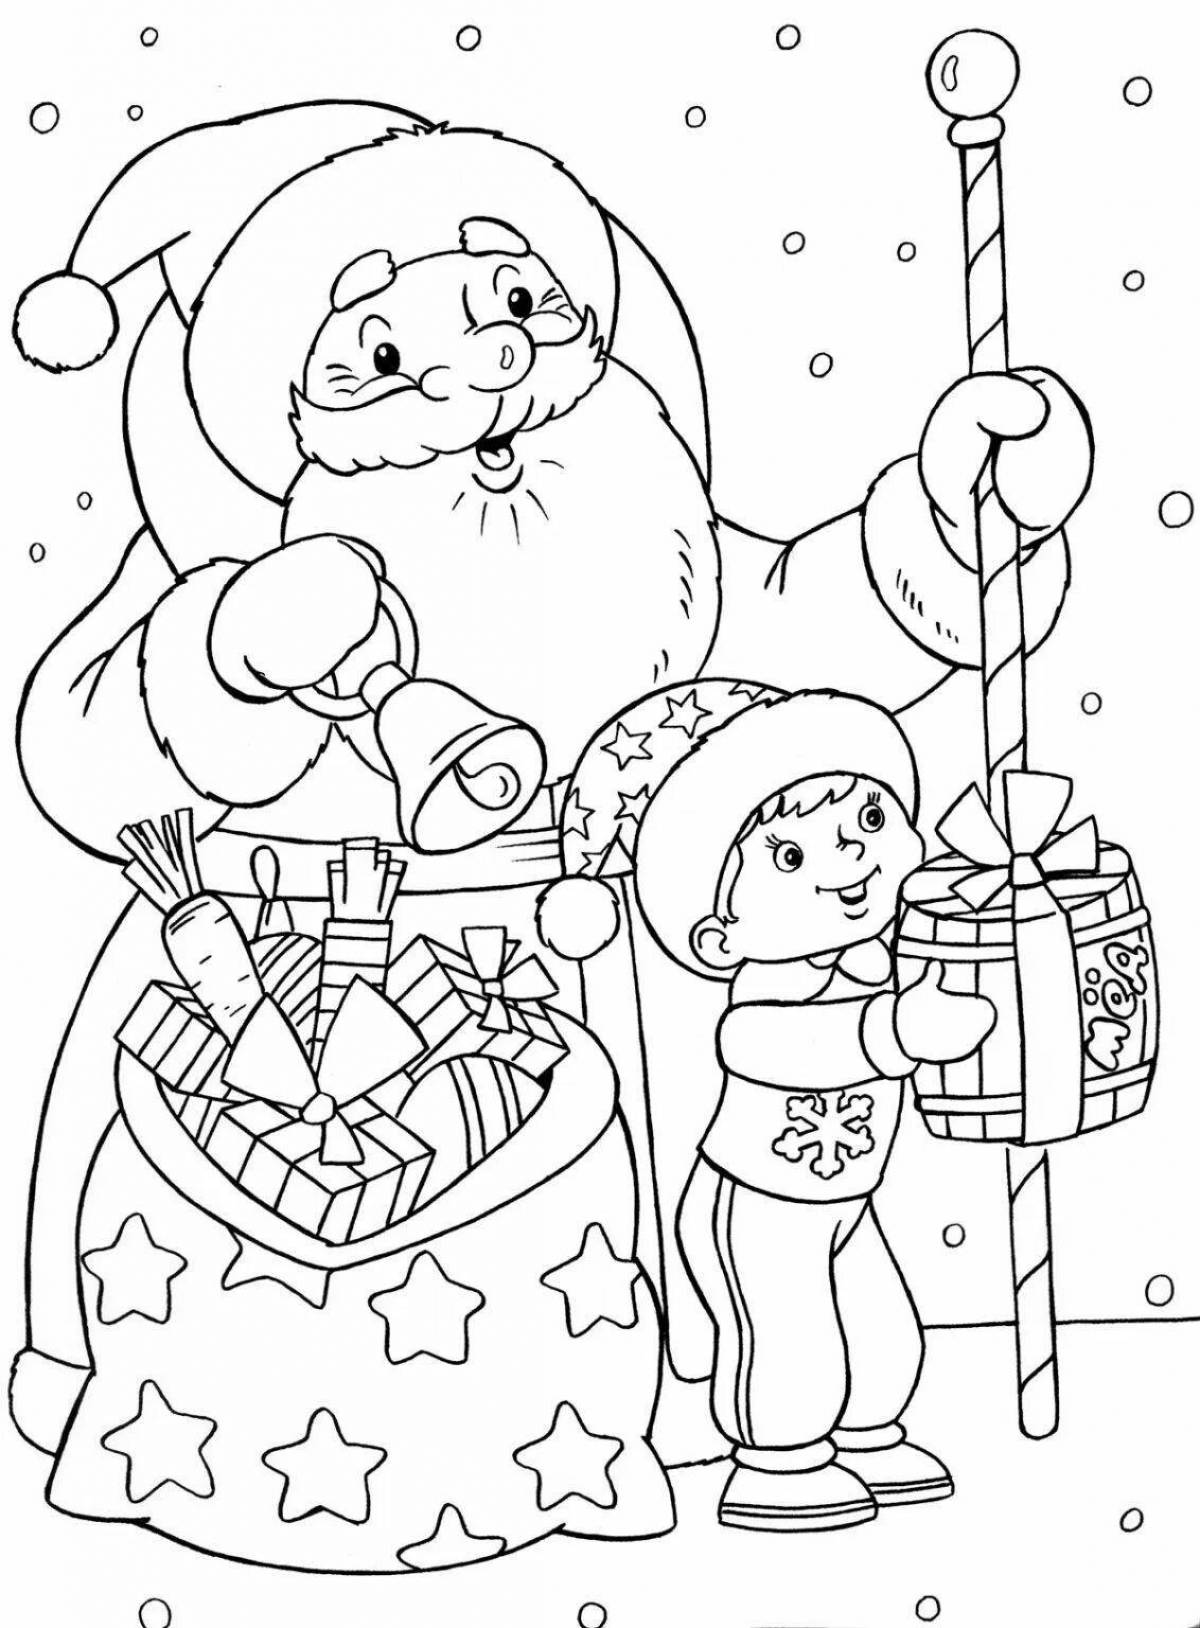 Coloring book jubilant new year 9 years